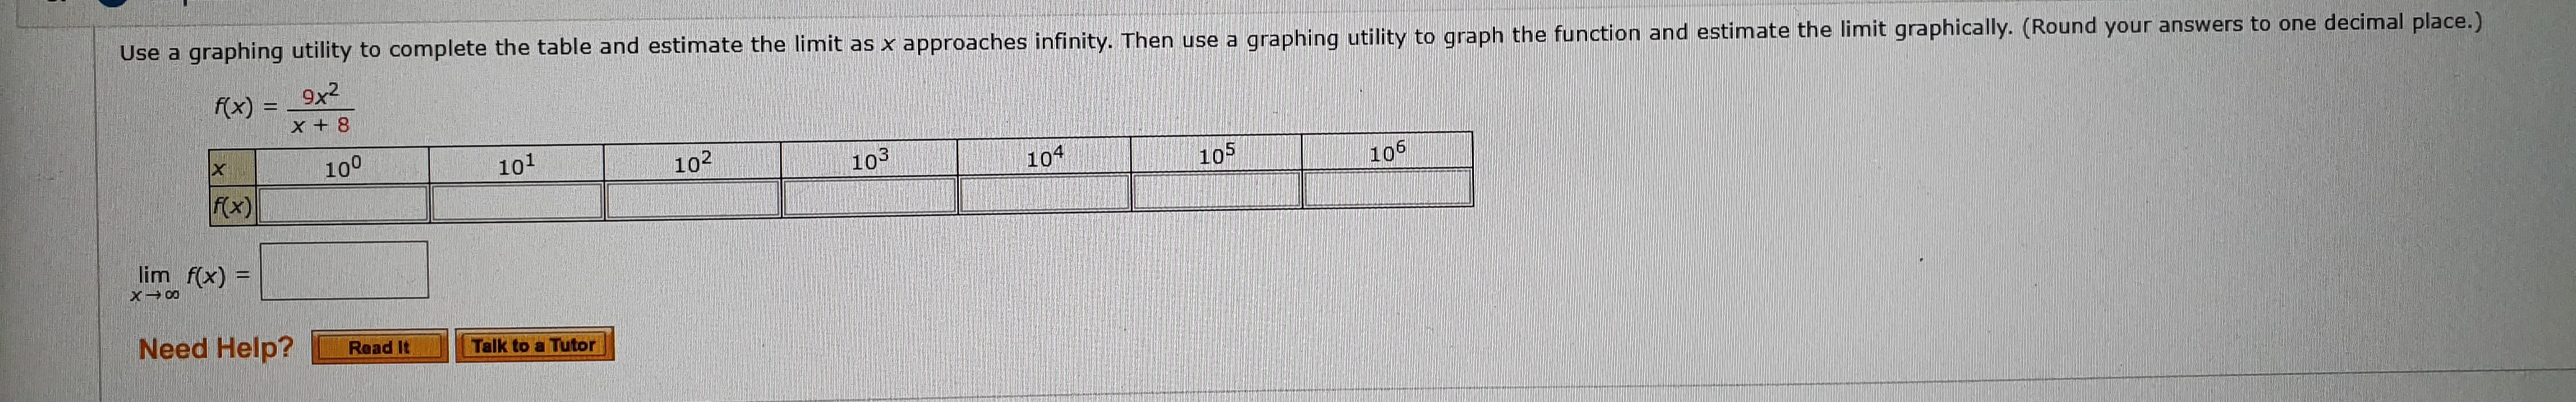 Use a graphing utility to complete the table and estimate the limit as x approaches infinity. Then use a
9x2
graphing utility to graph the function and estimate the limit graphically. (Round your answers to one decimal place.)
f(x)
X +8
100
101
102
103
104
fx)
105
105
lim f(x)
Need Help?
Read It
Talk to a Tutor
